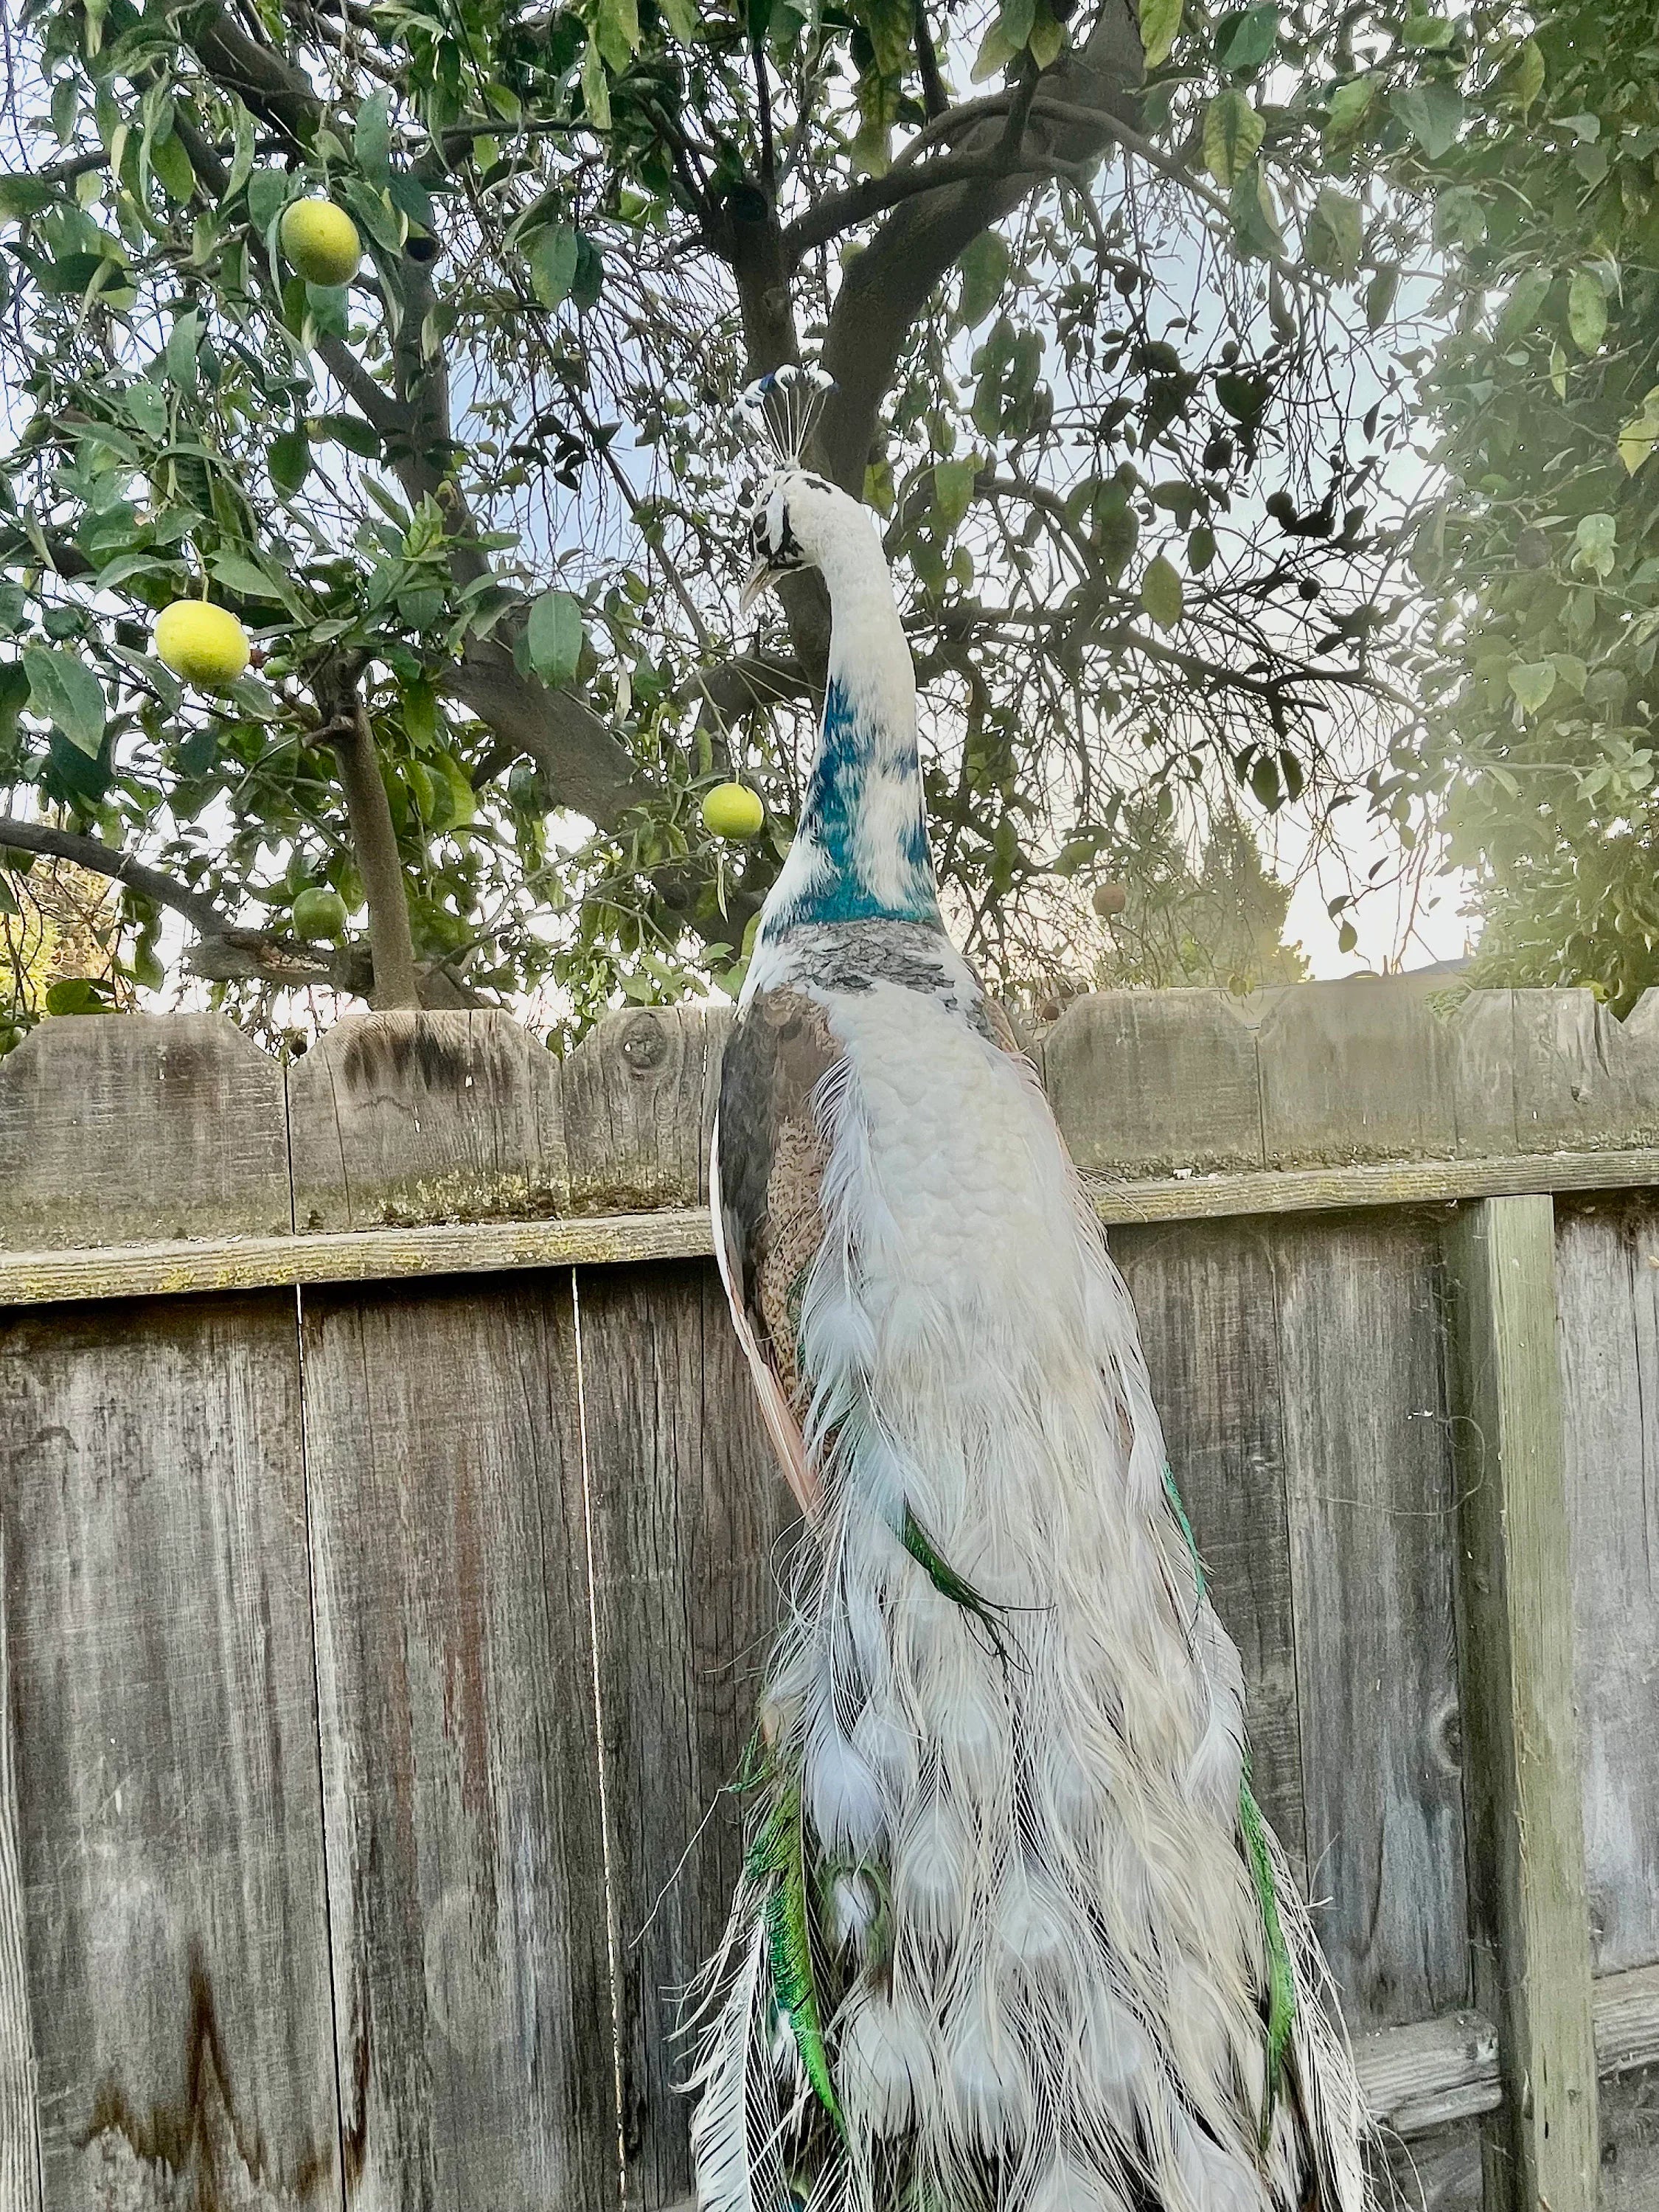 Ultra Rare white Pied PEACOCK Taxidermy Mount museum quality